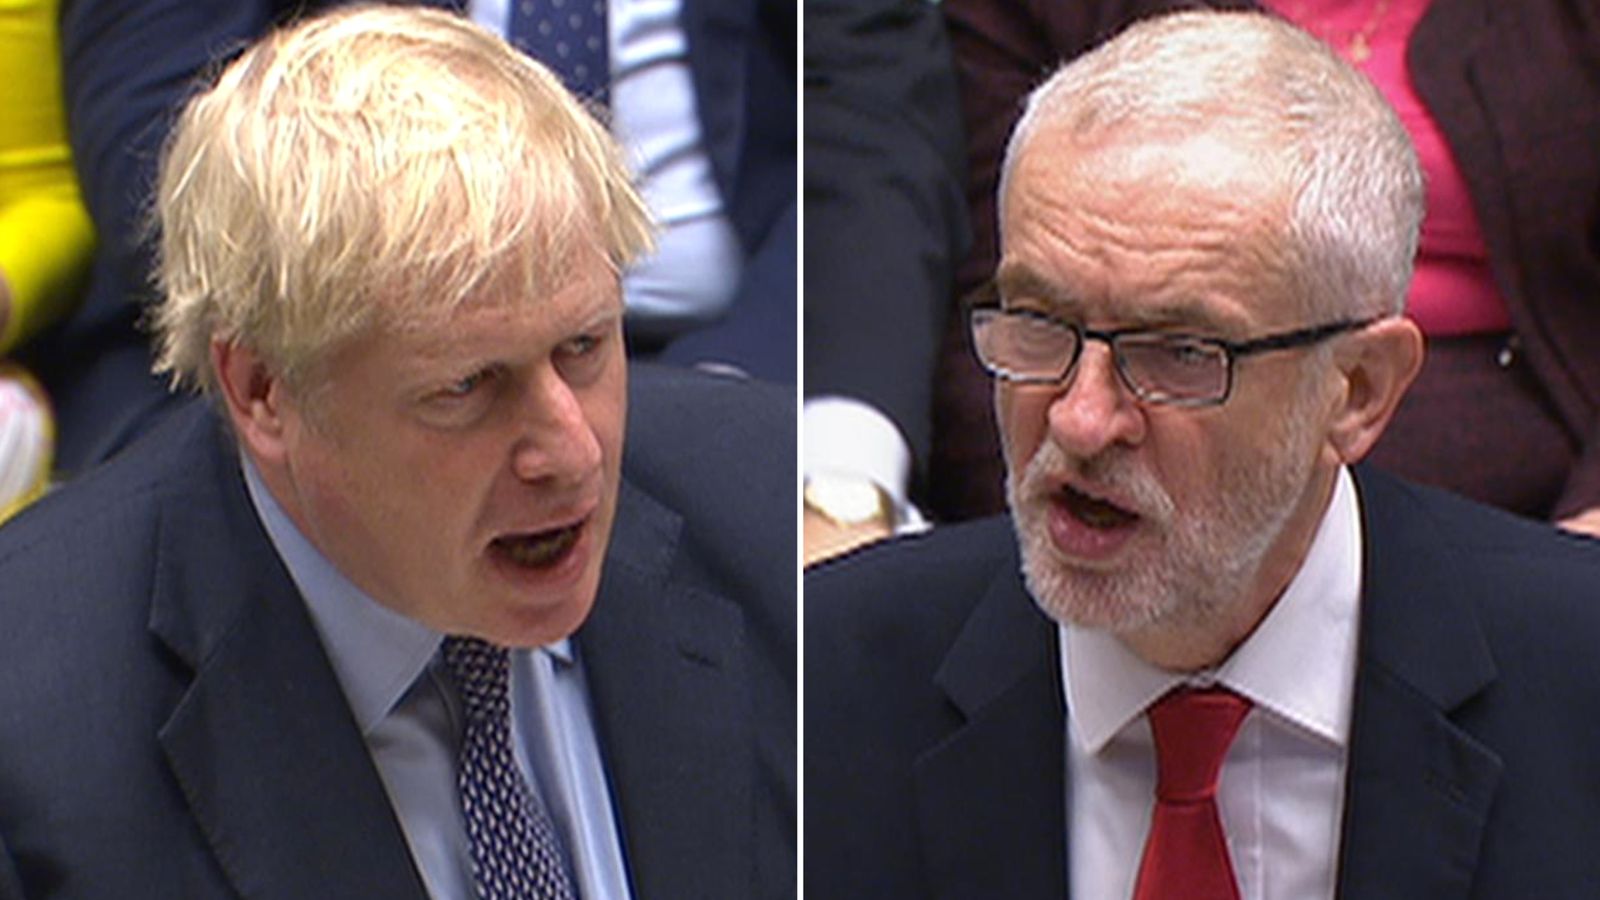 PM tells Corbyn to 'man up' on election as EU agrees need for Brexit extension